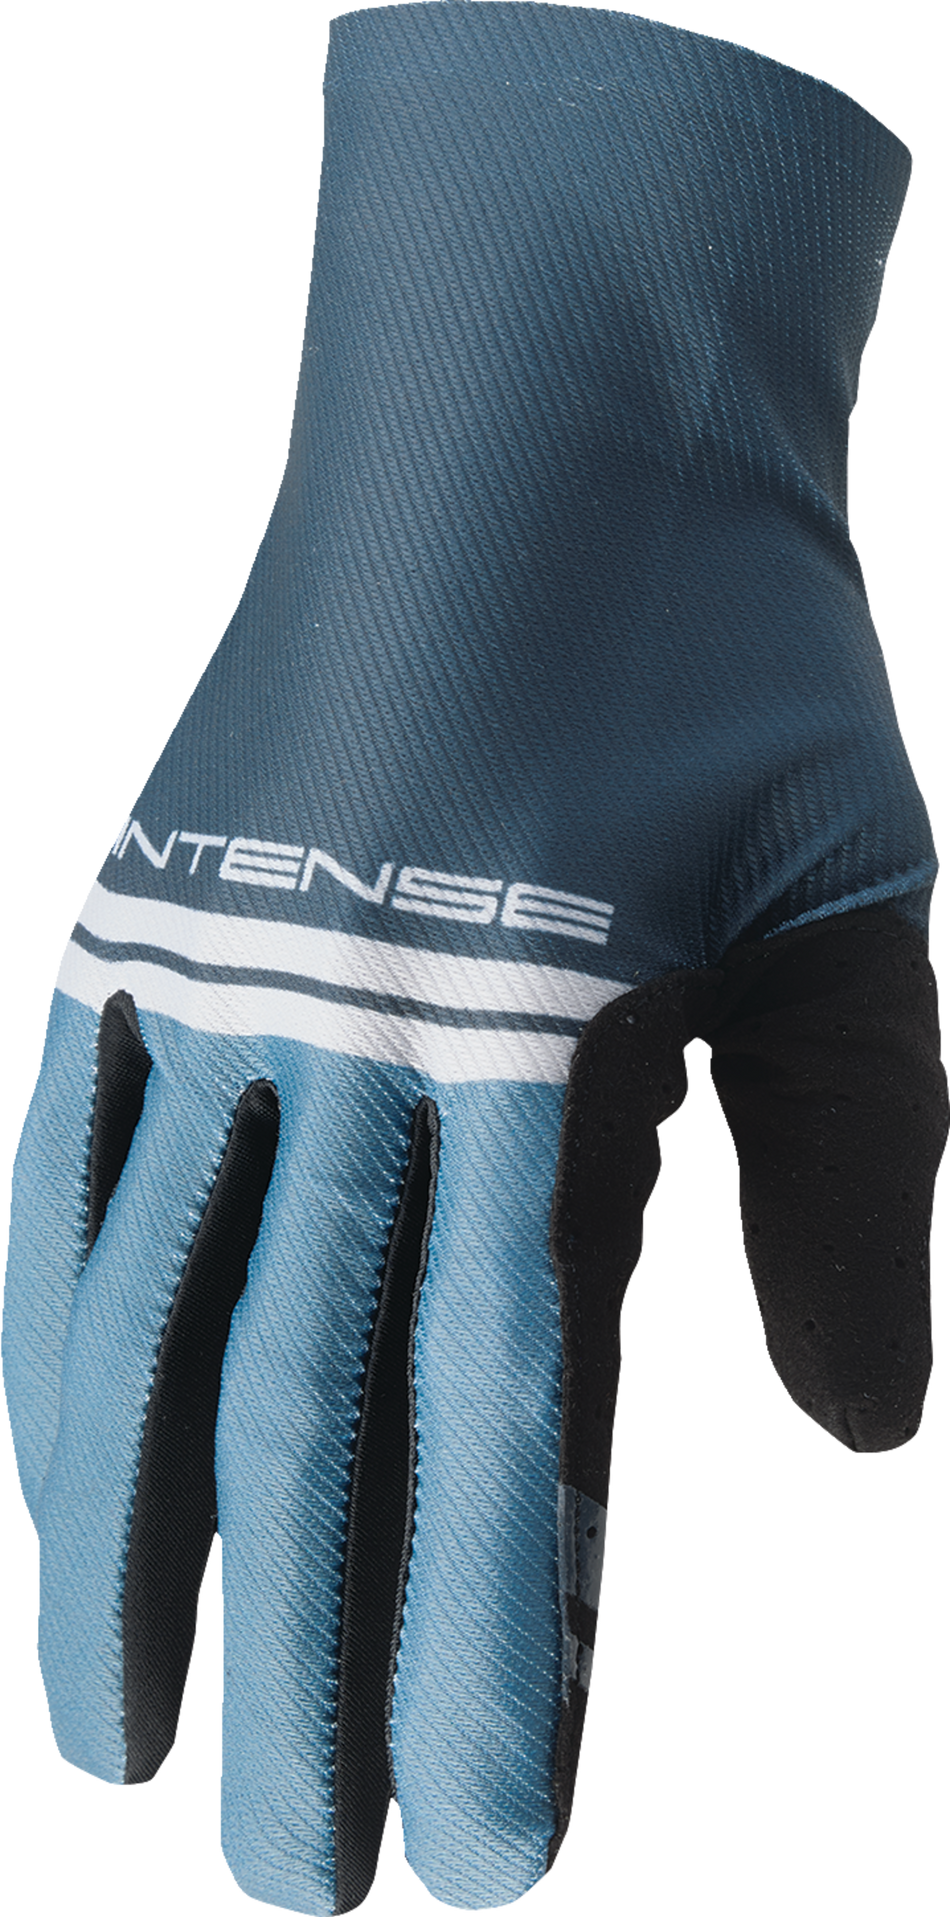 THOR Intense Assist Censis Gloves - Teal/Midnight - Small 3360-0236